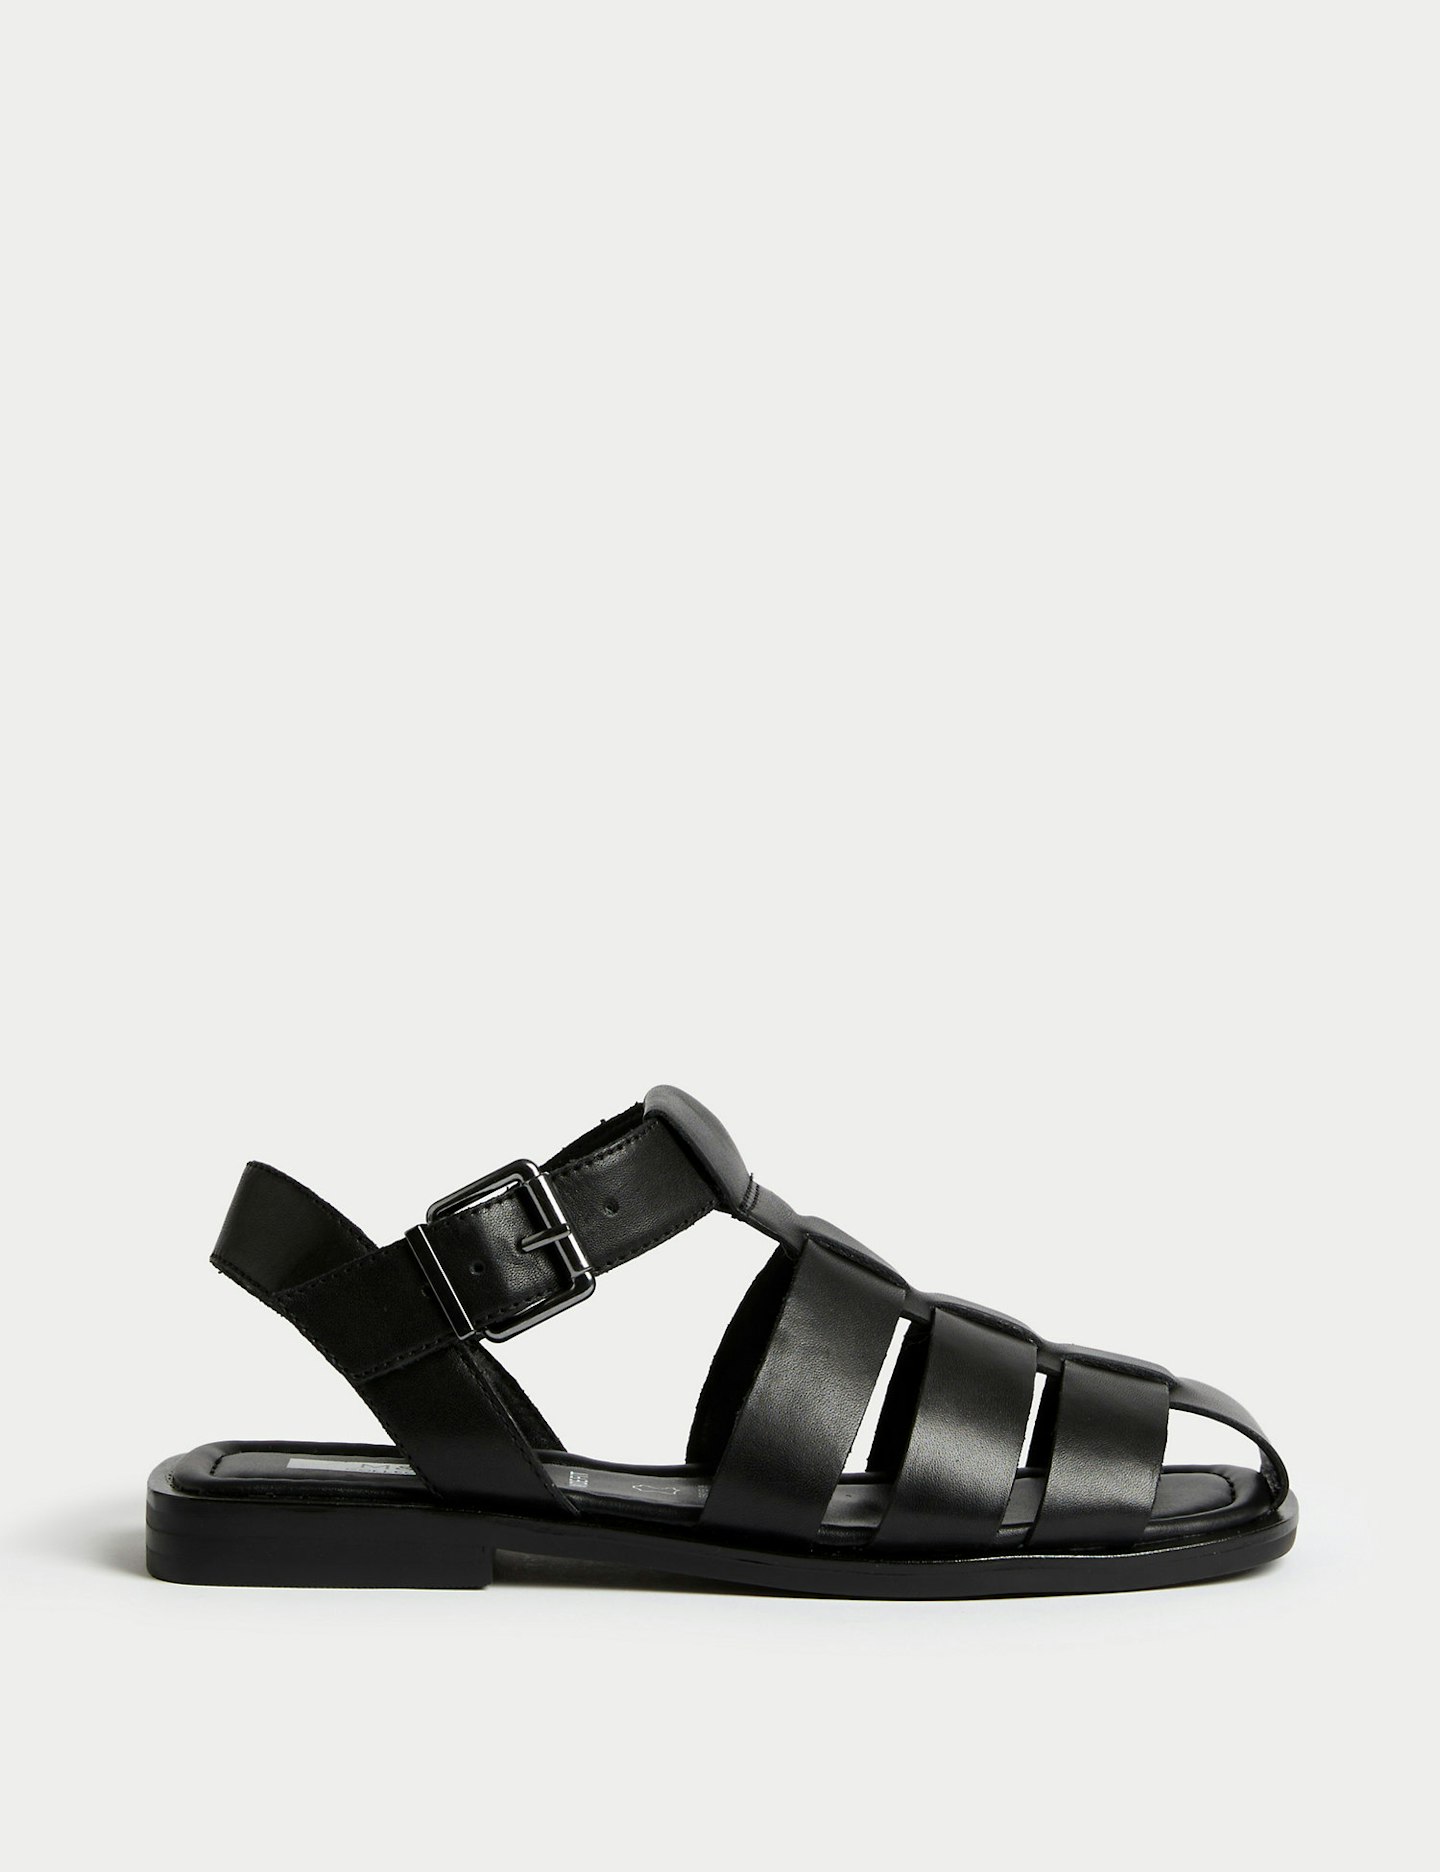 M&S Wide Fit Leather Strappy Sandals